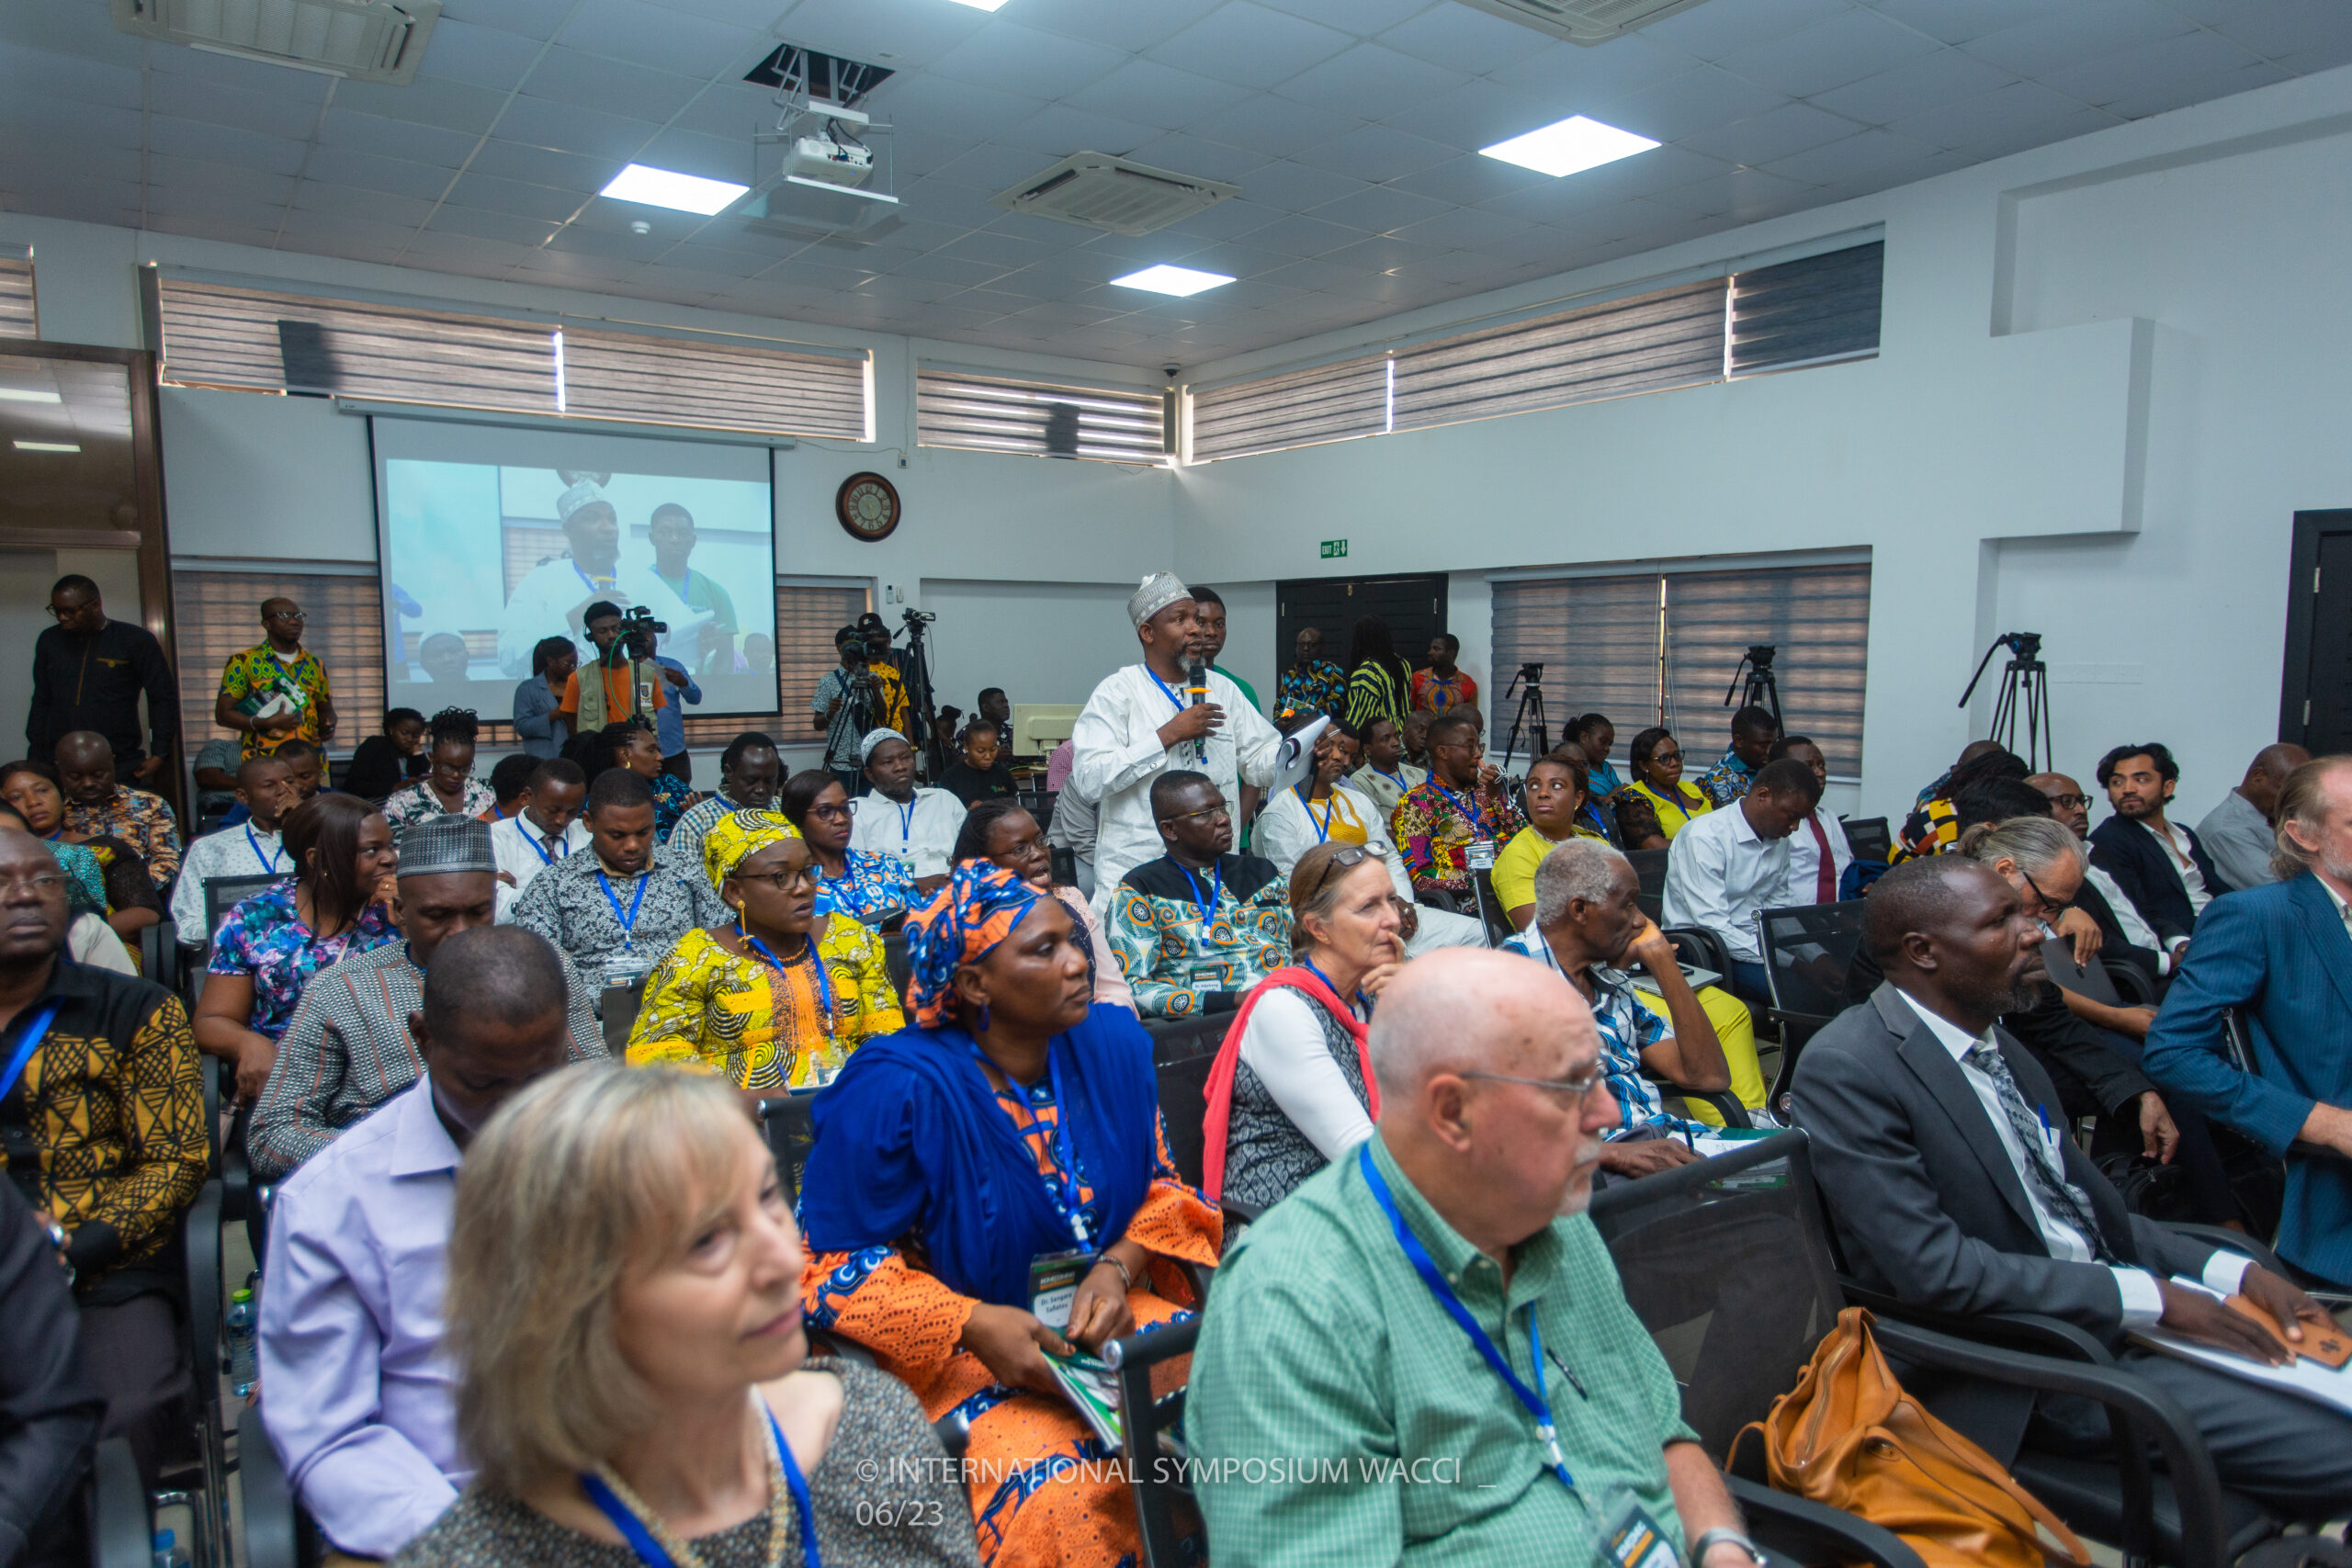 West Africa Center for Crop Improvement (WACCI) and Alliance for Science conference in Ghana